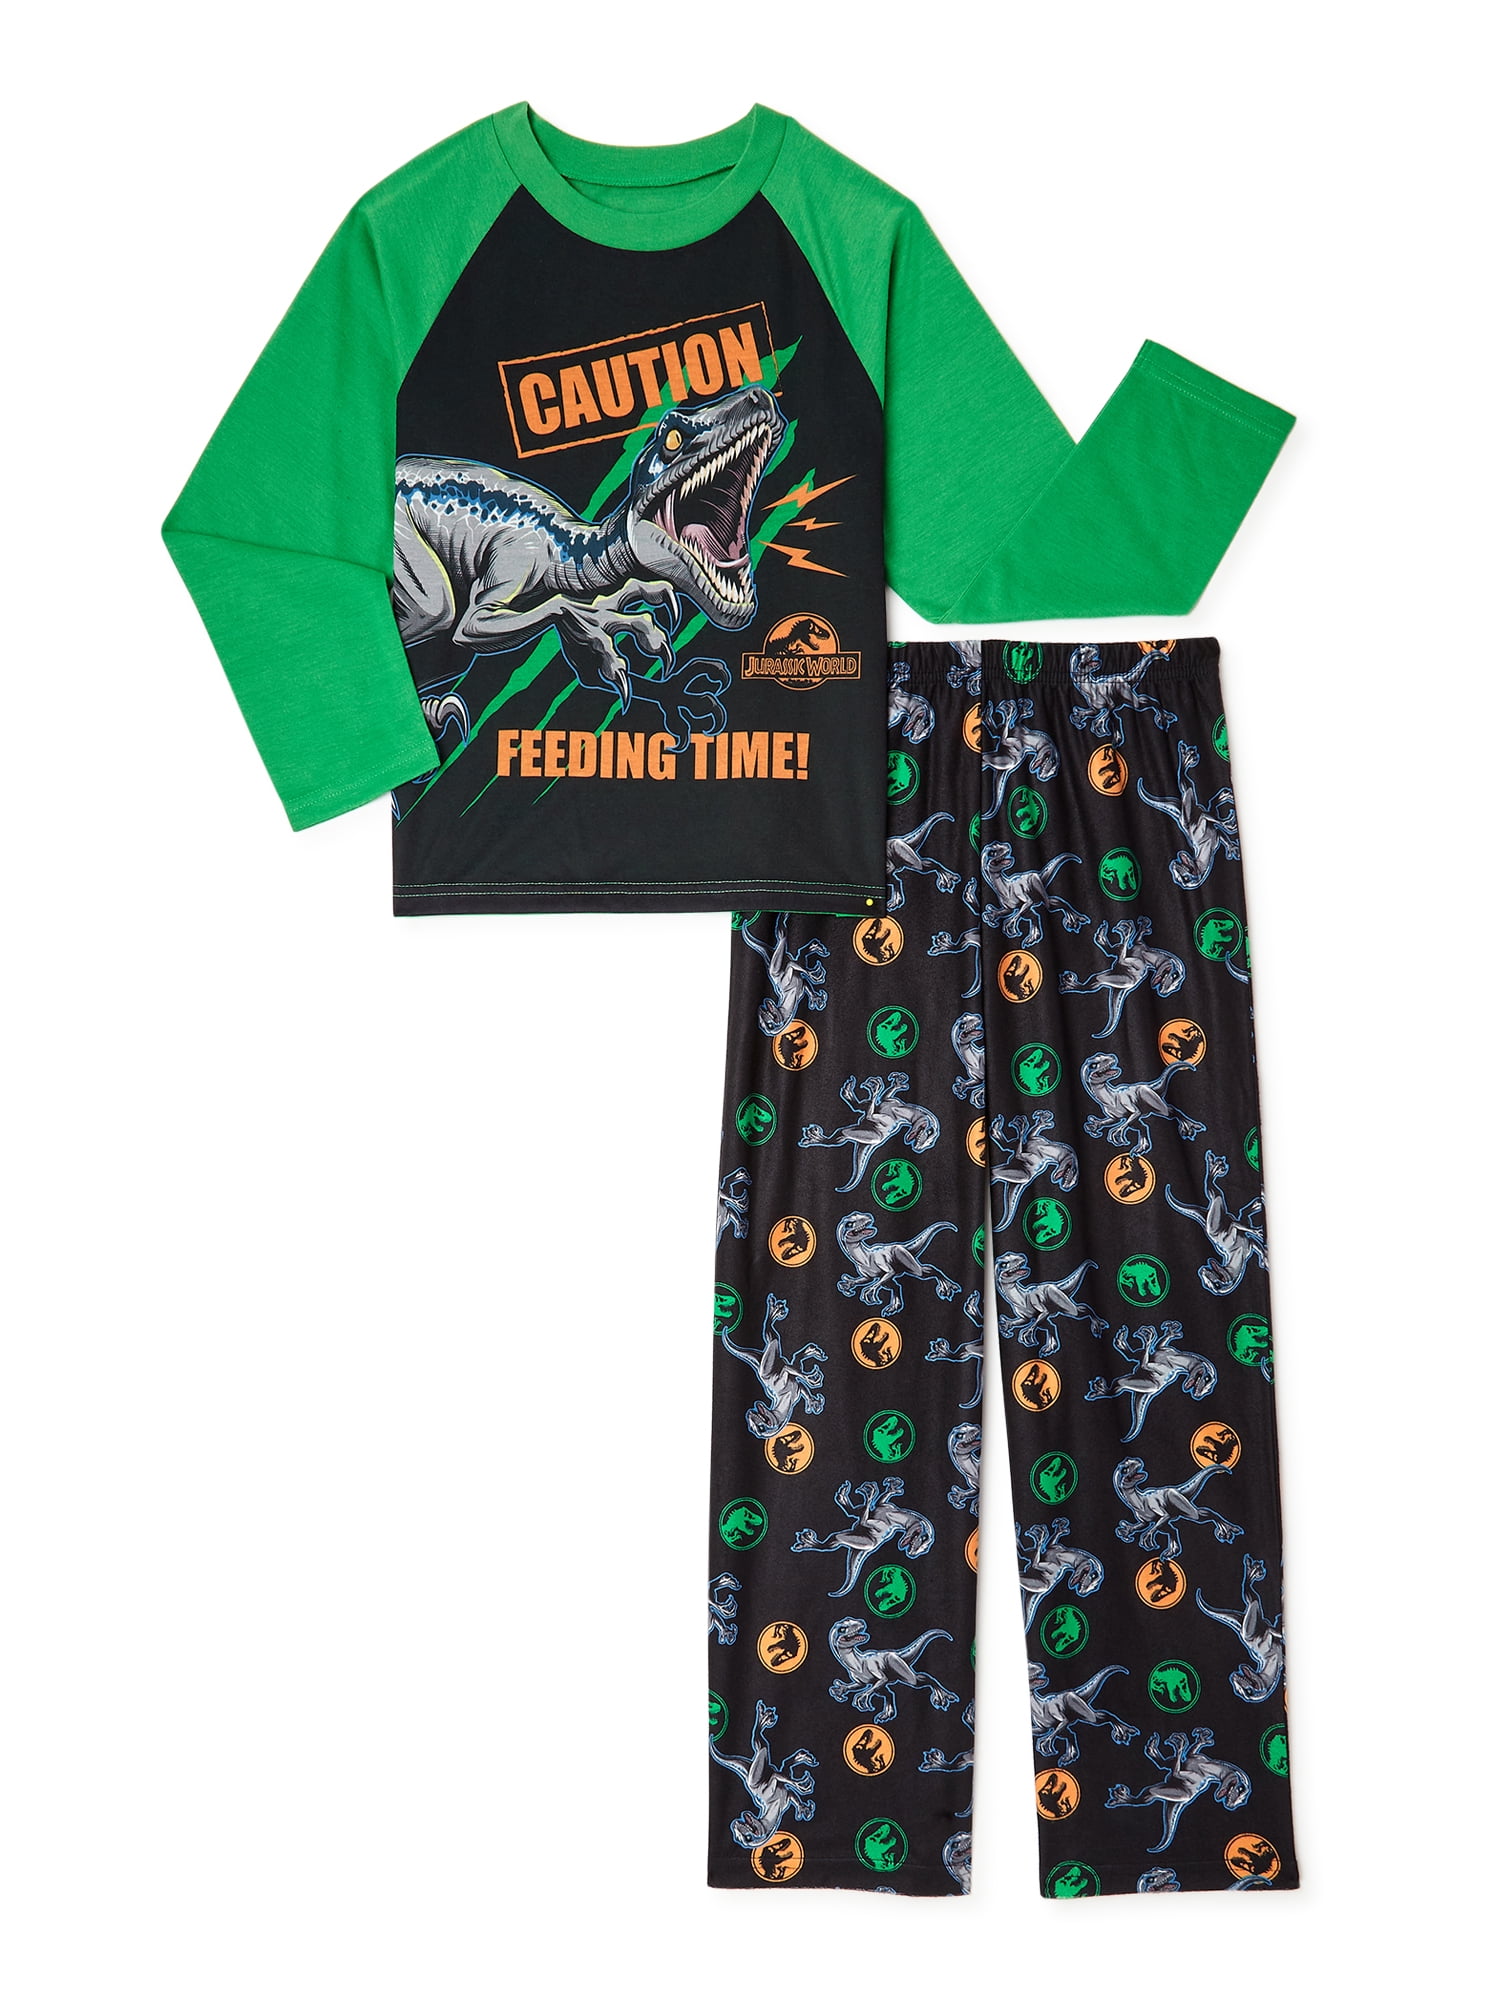 Details about   NEW BOY TUBE HERO ITS WILL BE AWESOME 2 PIECE PAJAMA SET SIZE XS 4/5 